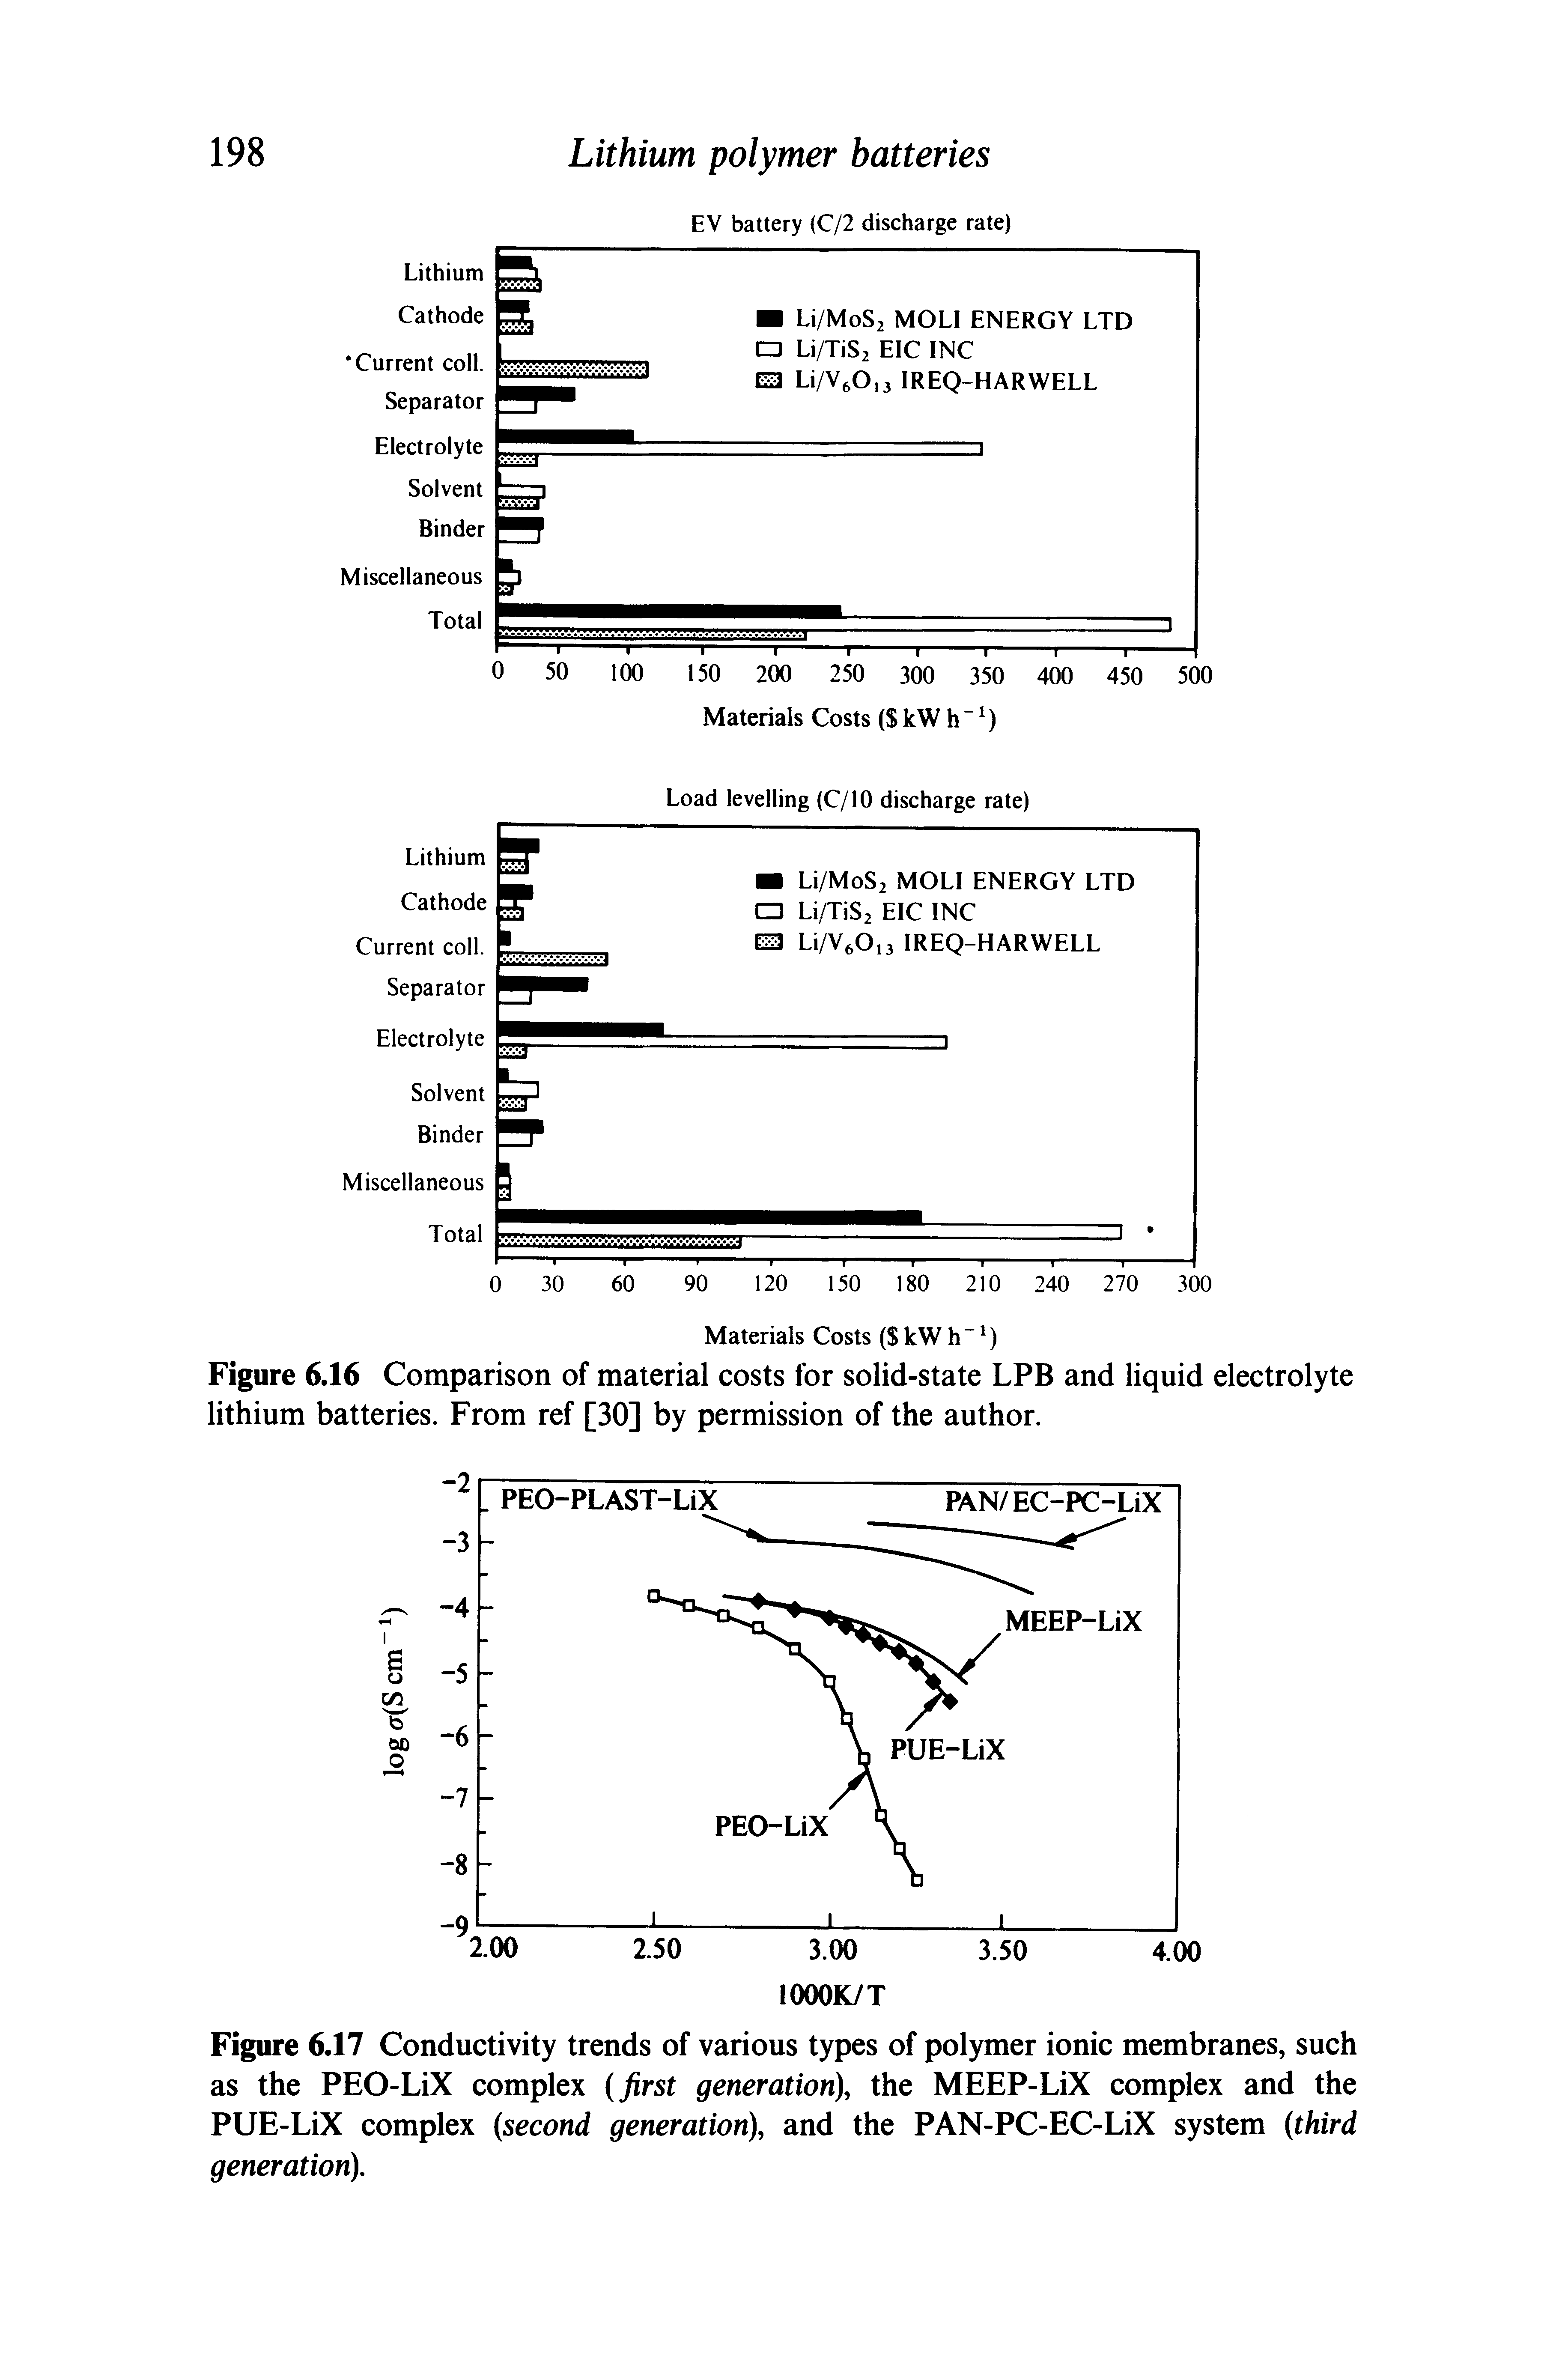 Figure 6.17 Conductivity trends of various types of polymer ionic membranes, such as the PEO-LiX complex (first generation), the MEEP-LiX complex and the PUE-LiX complex (second generation), and the PAN-PC-EC-LiX system (third generation).